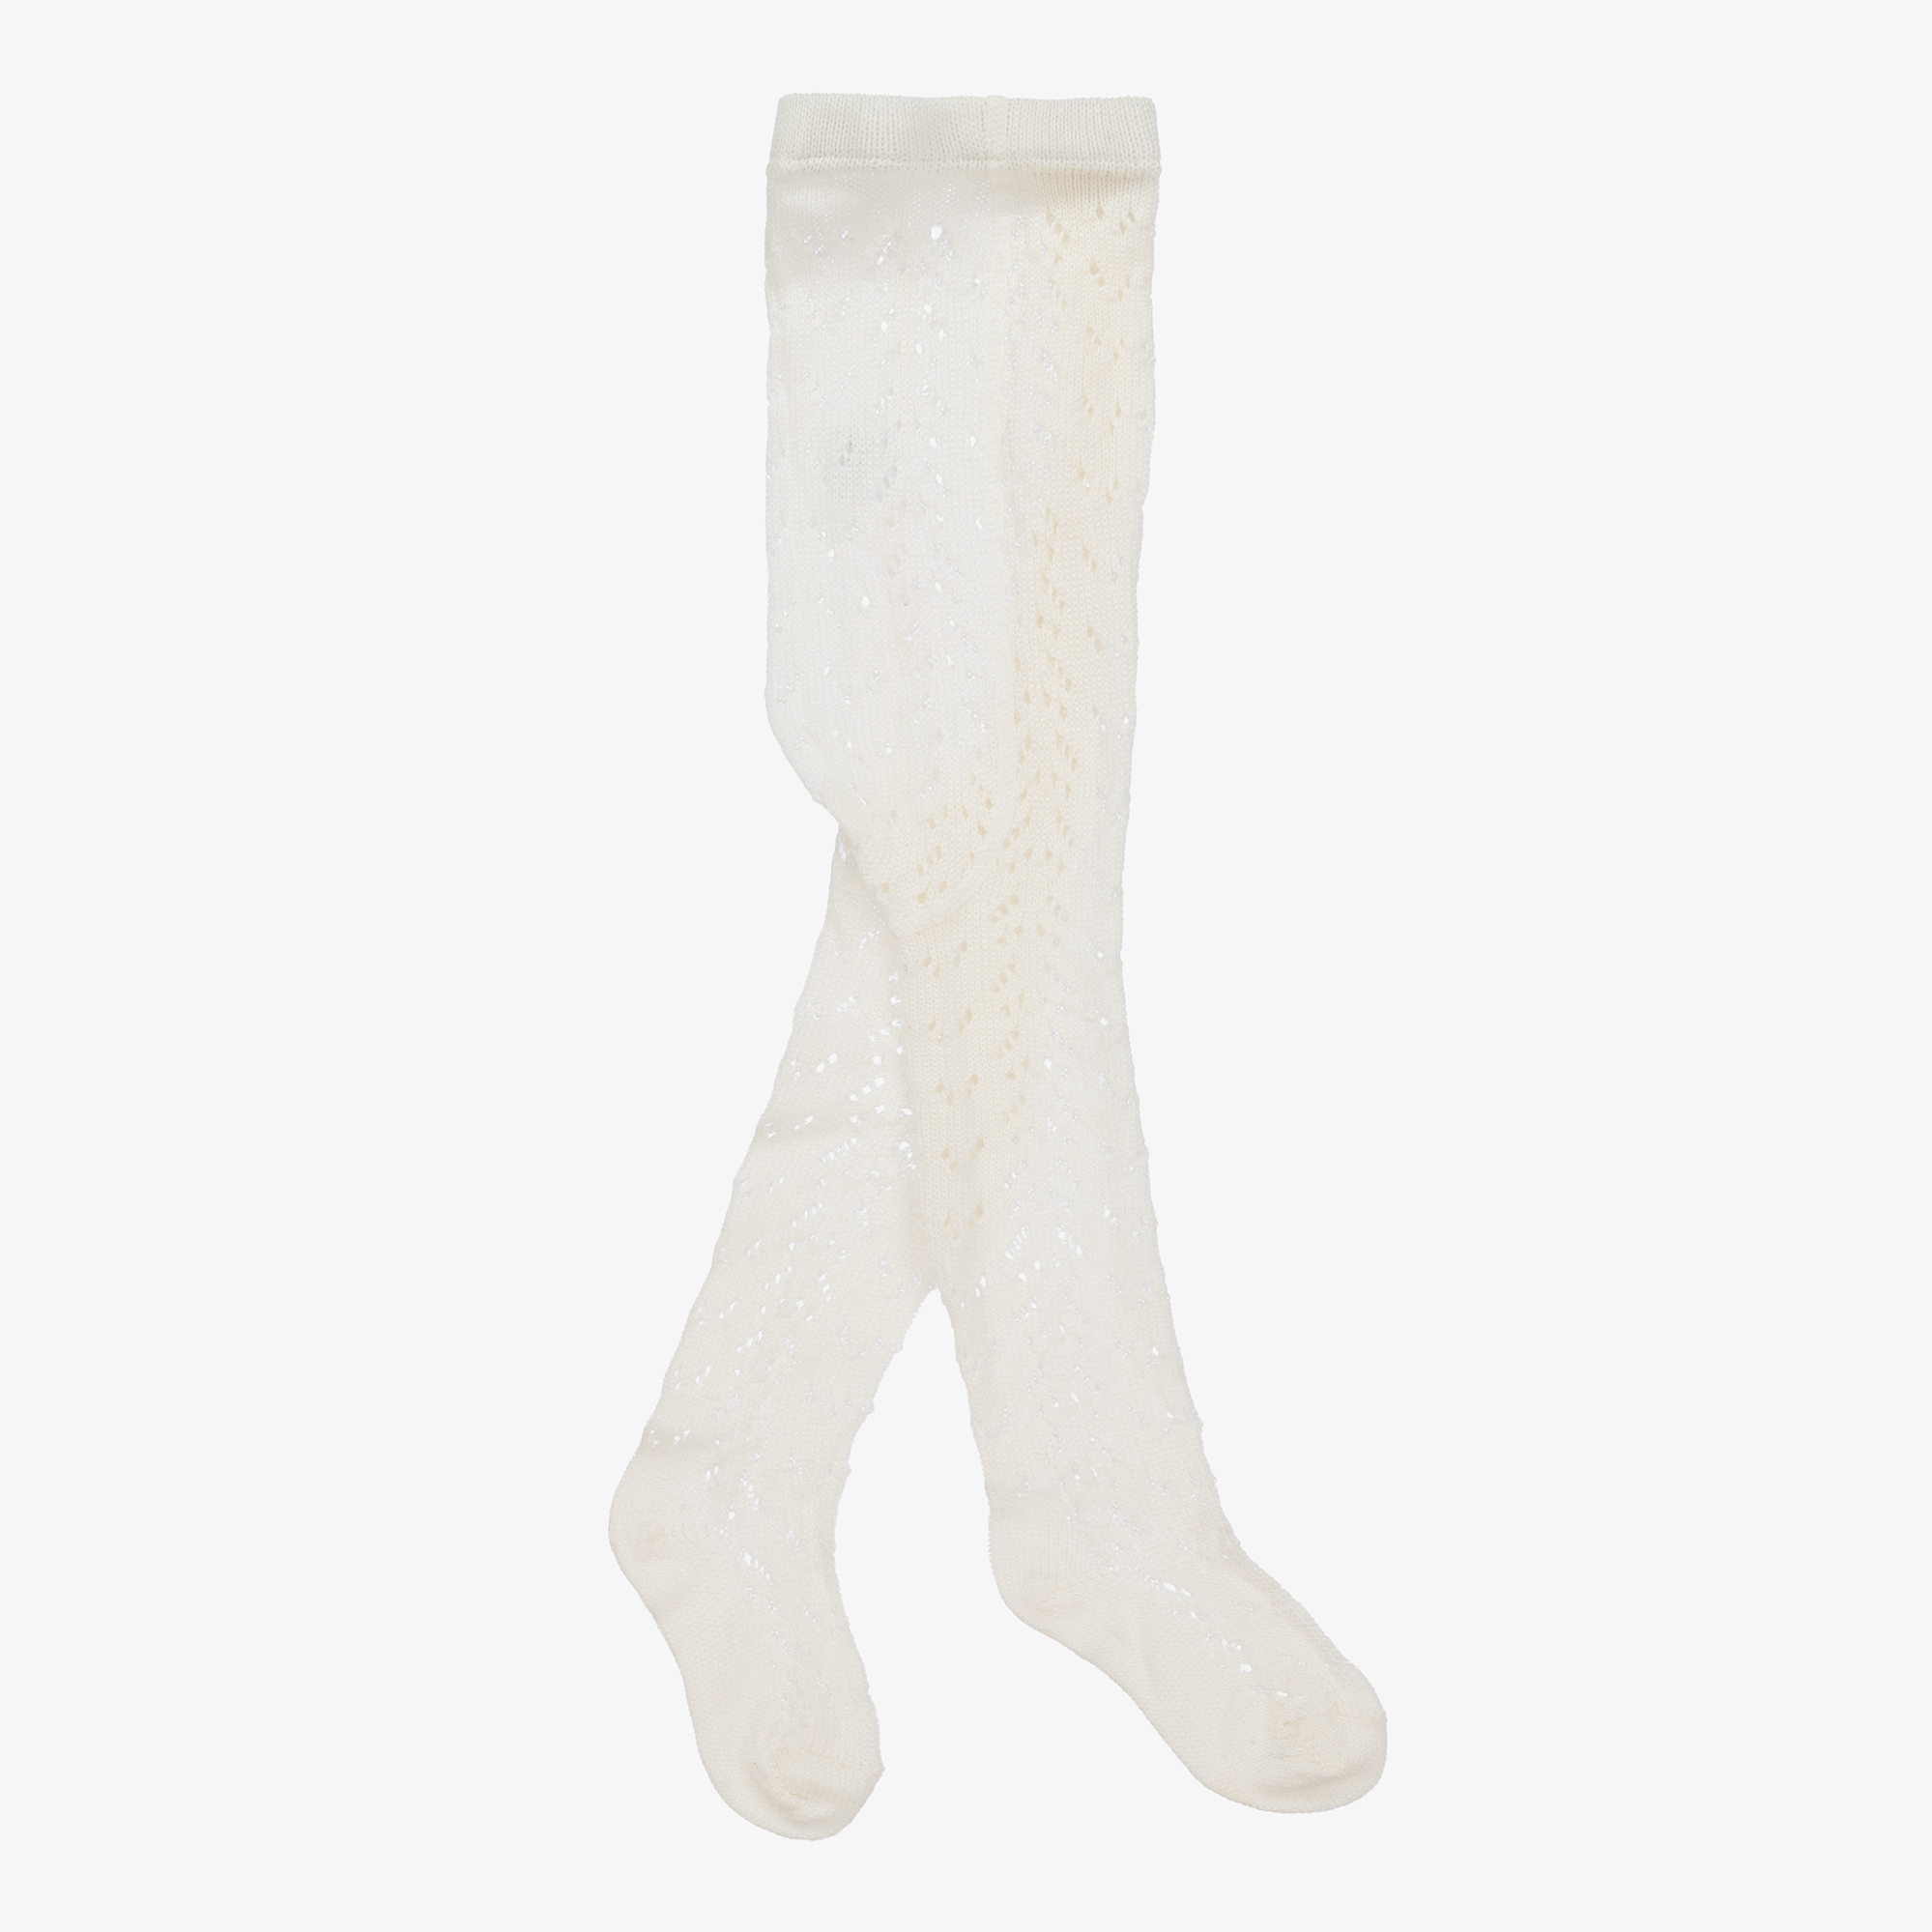 Carlomagno - Girls Ivory Cotton Bow Tights